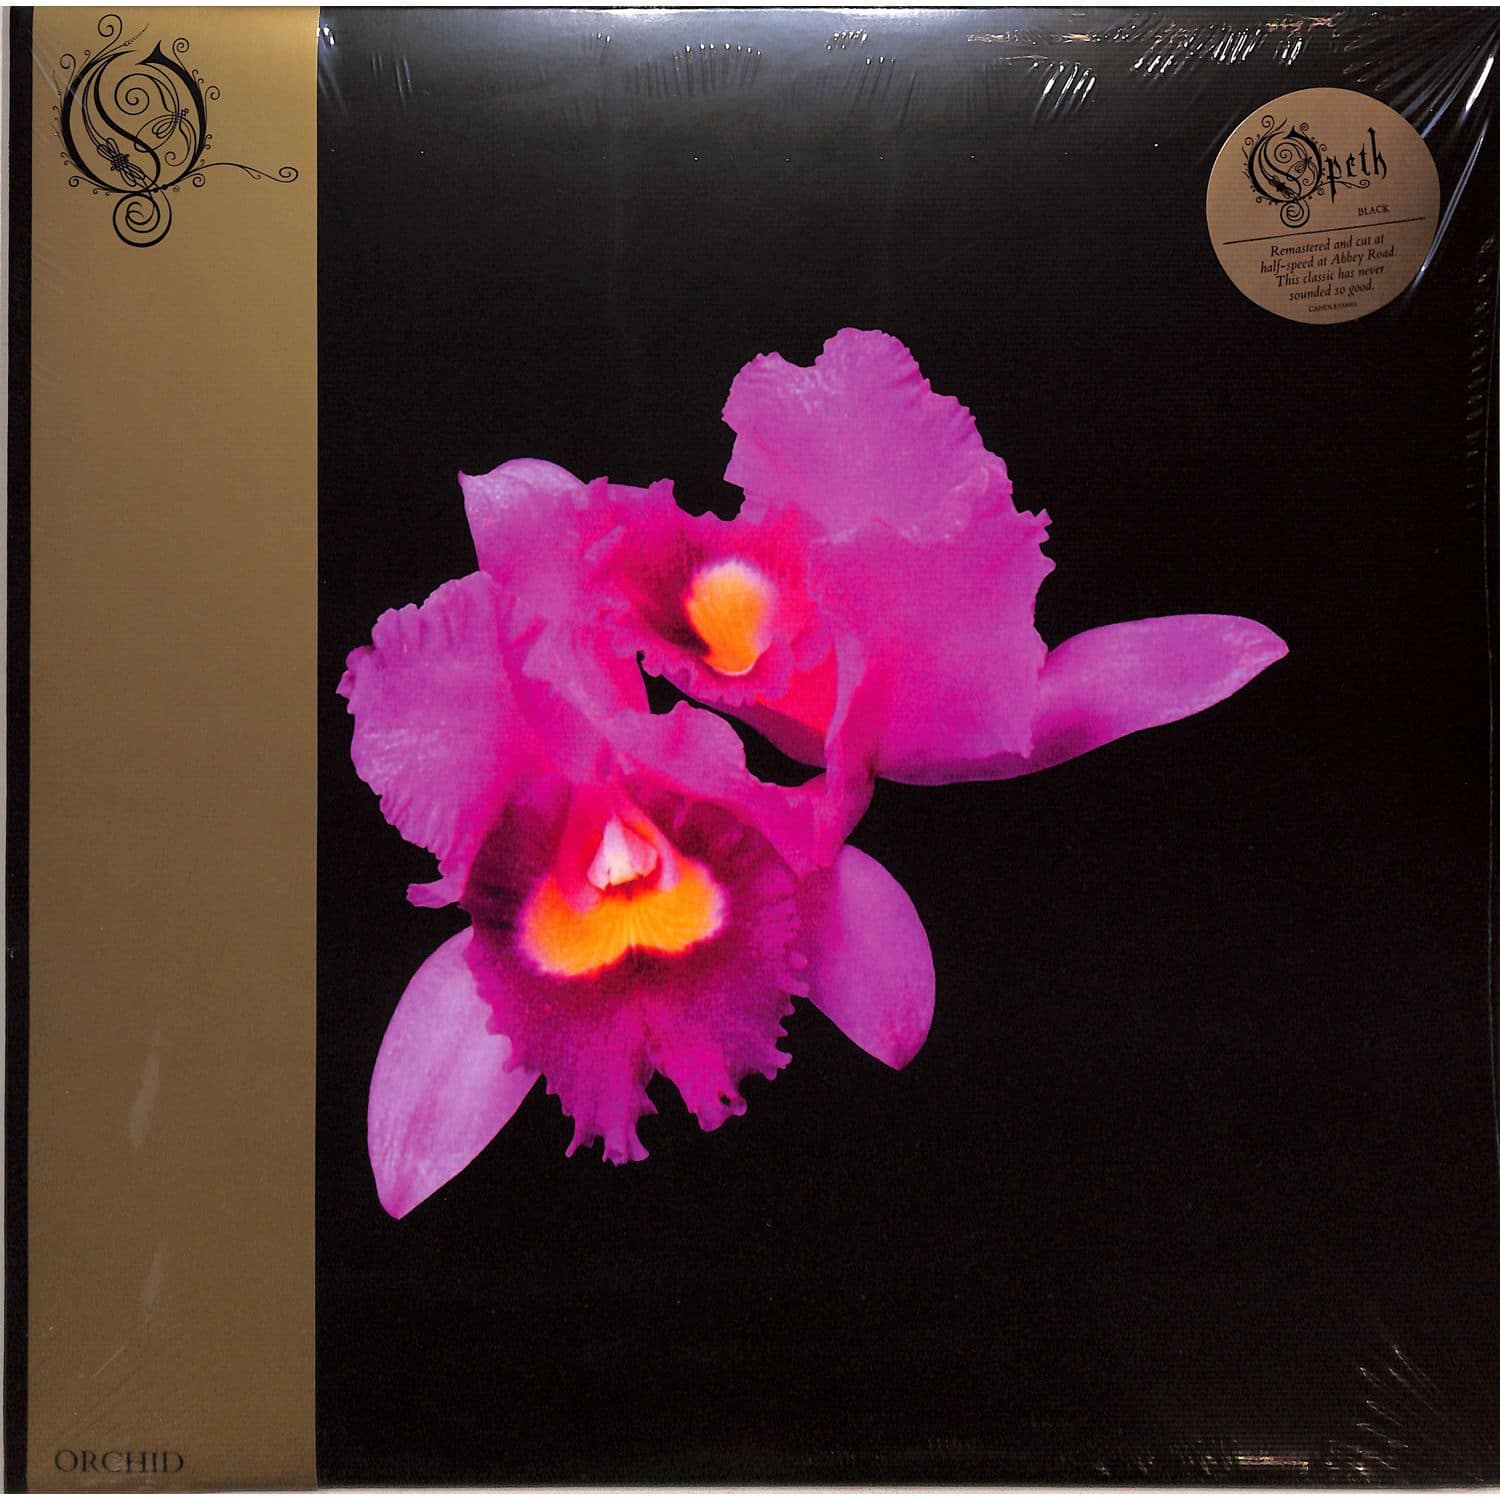 Opeth - ORCHID 